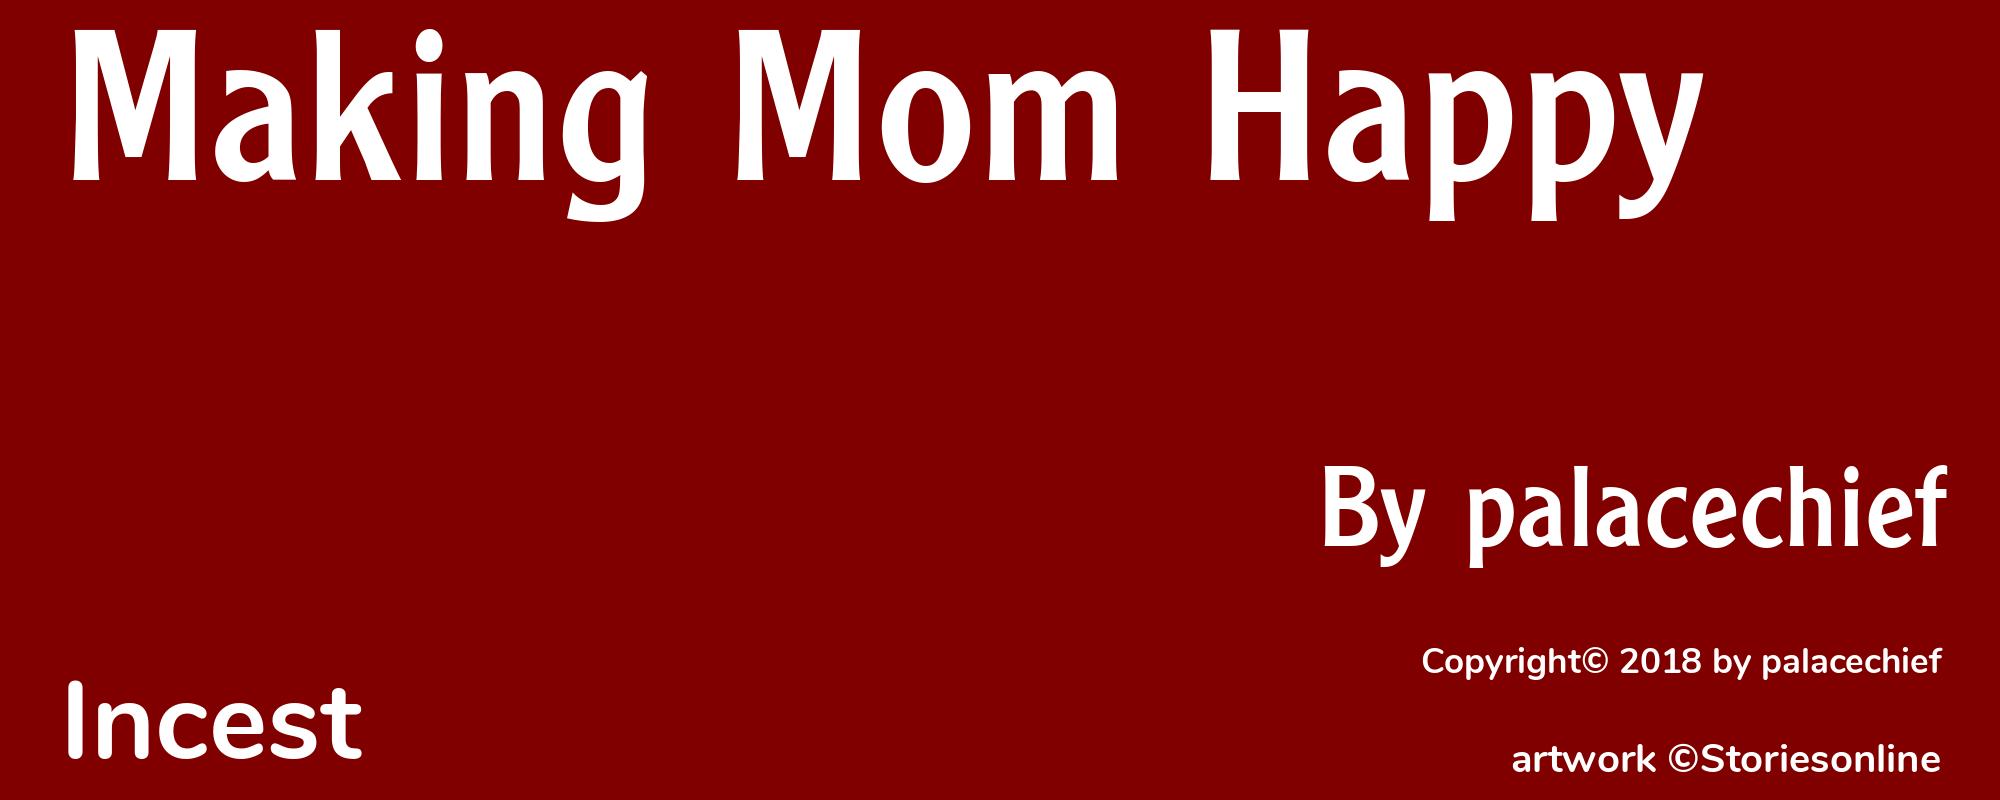 Making Mom Happy - Cover